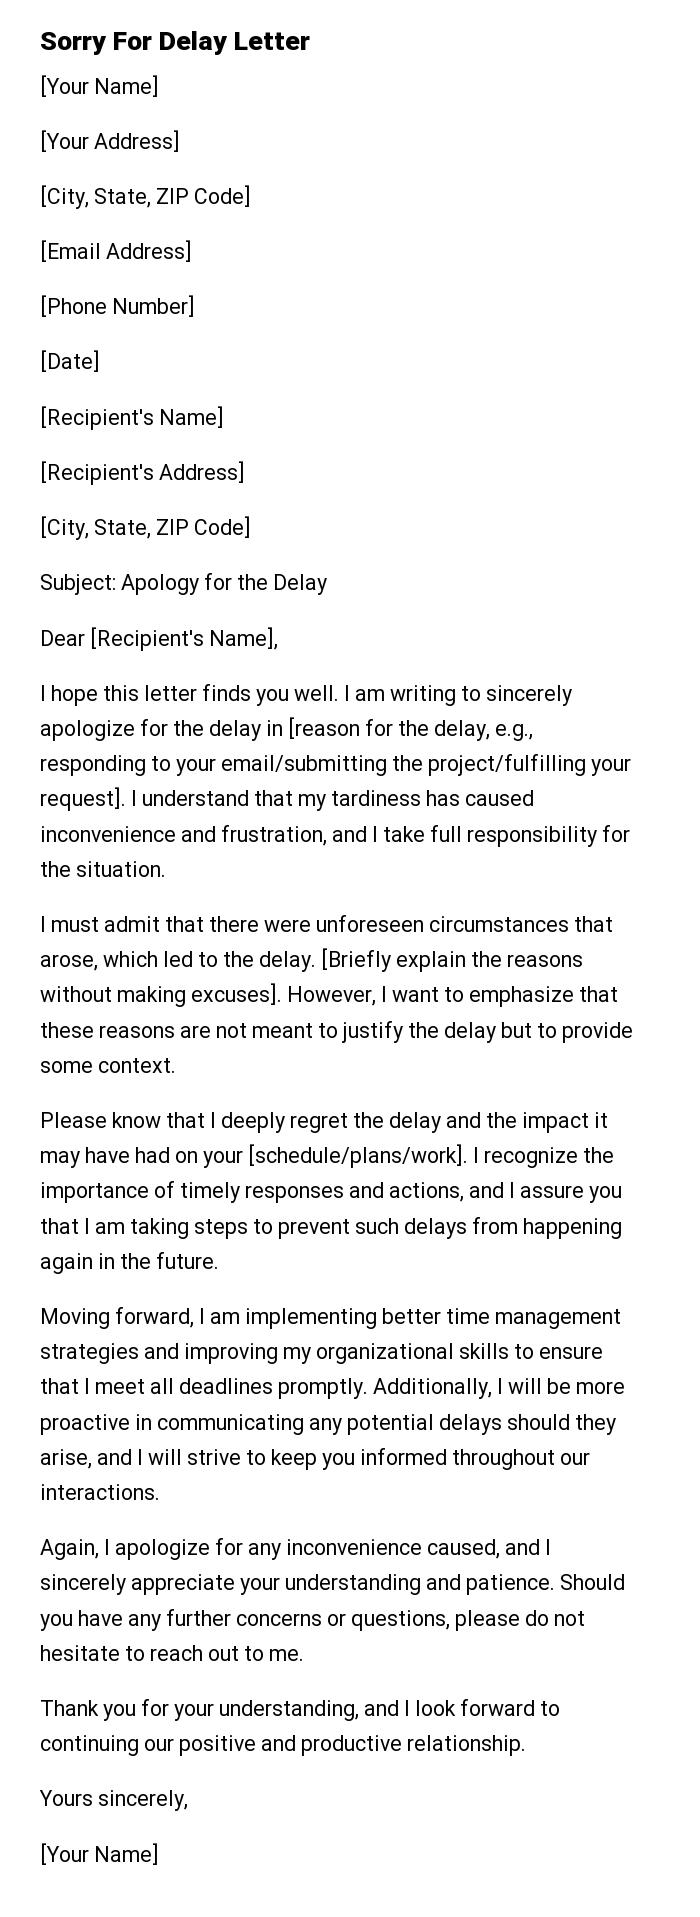 Sorry For Delay Letter